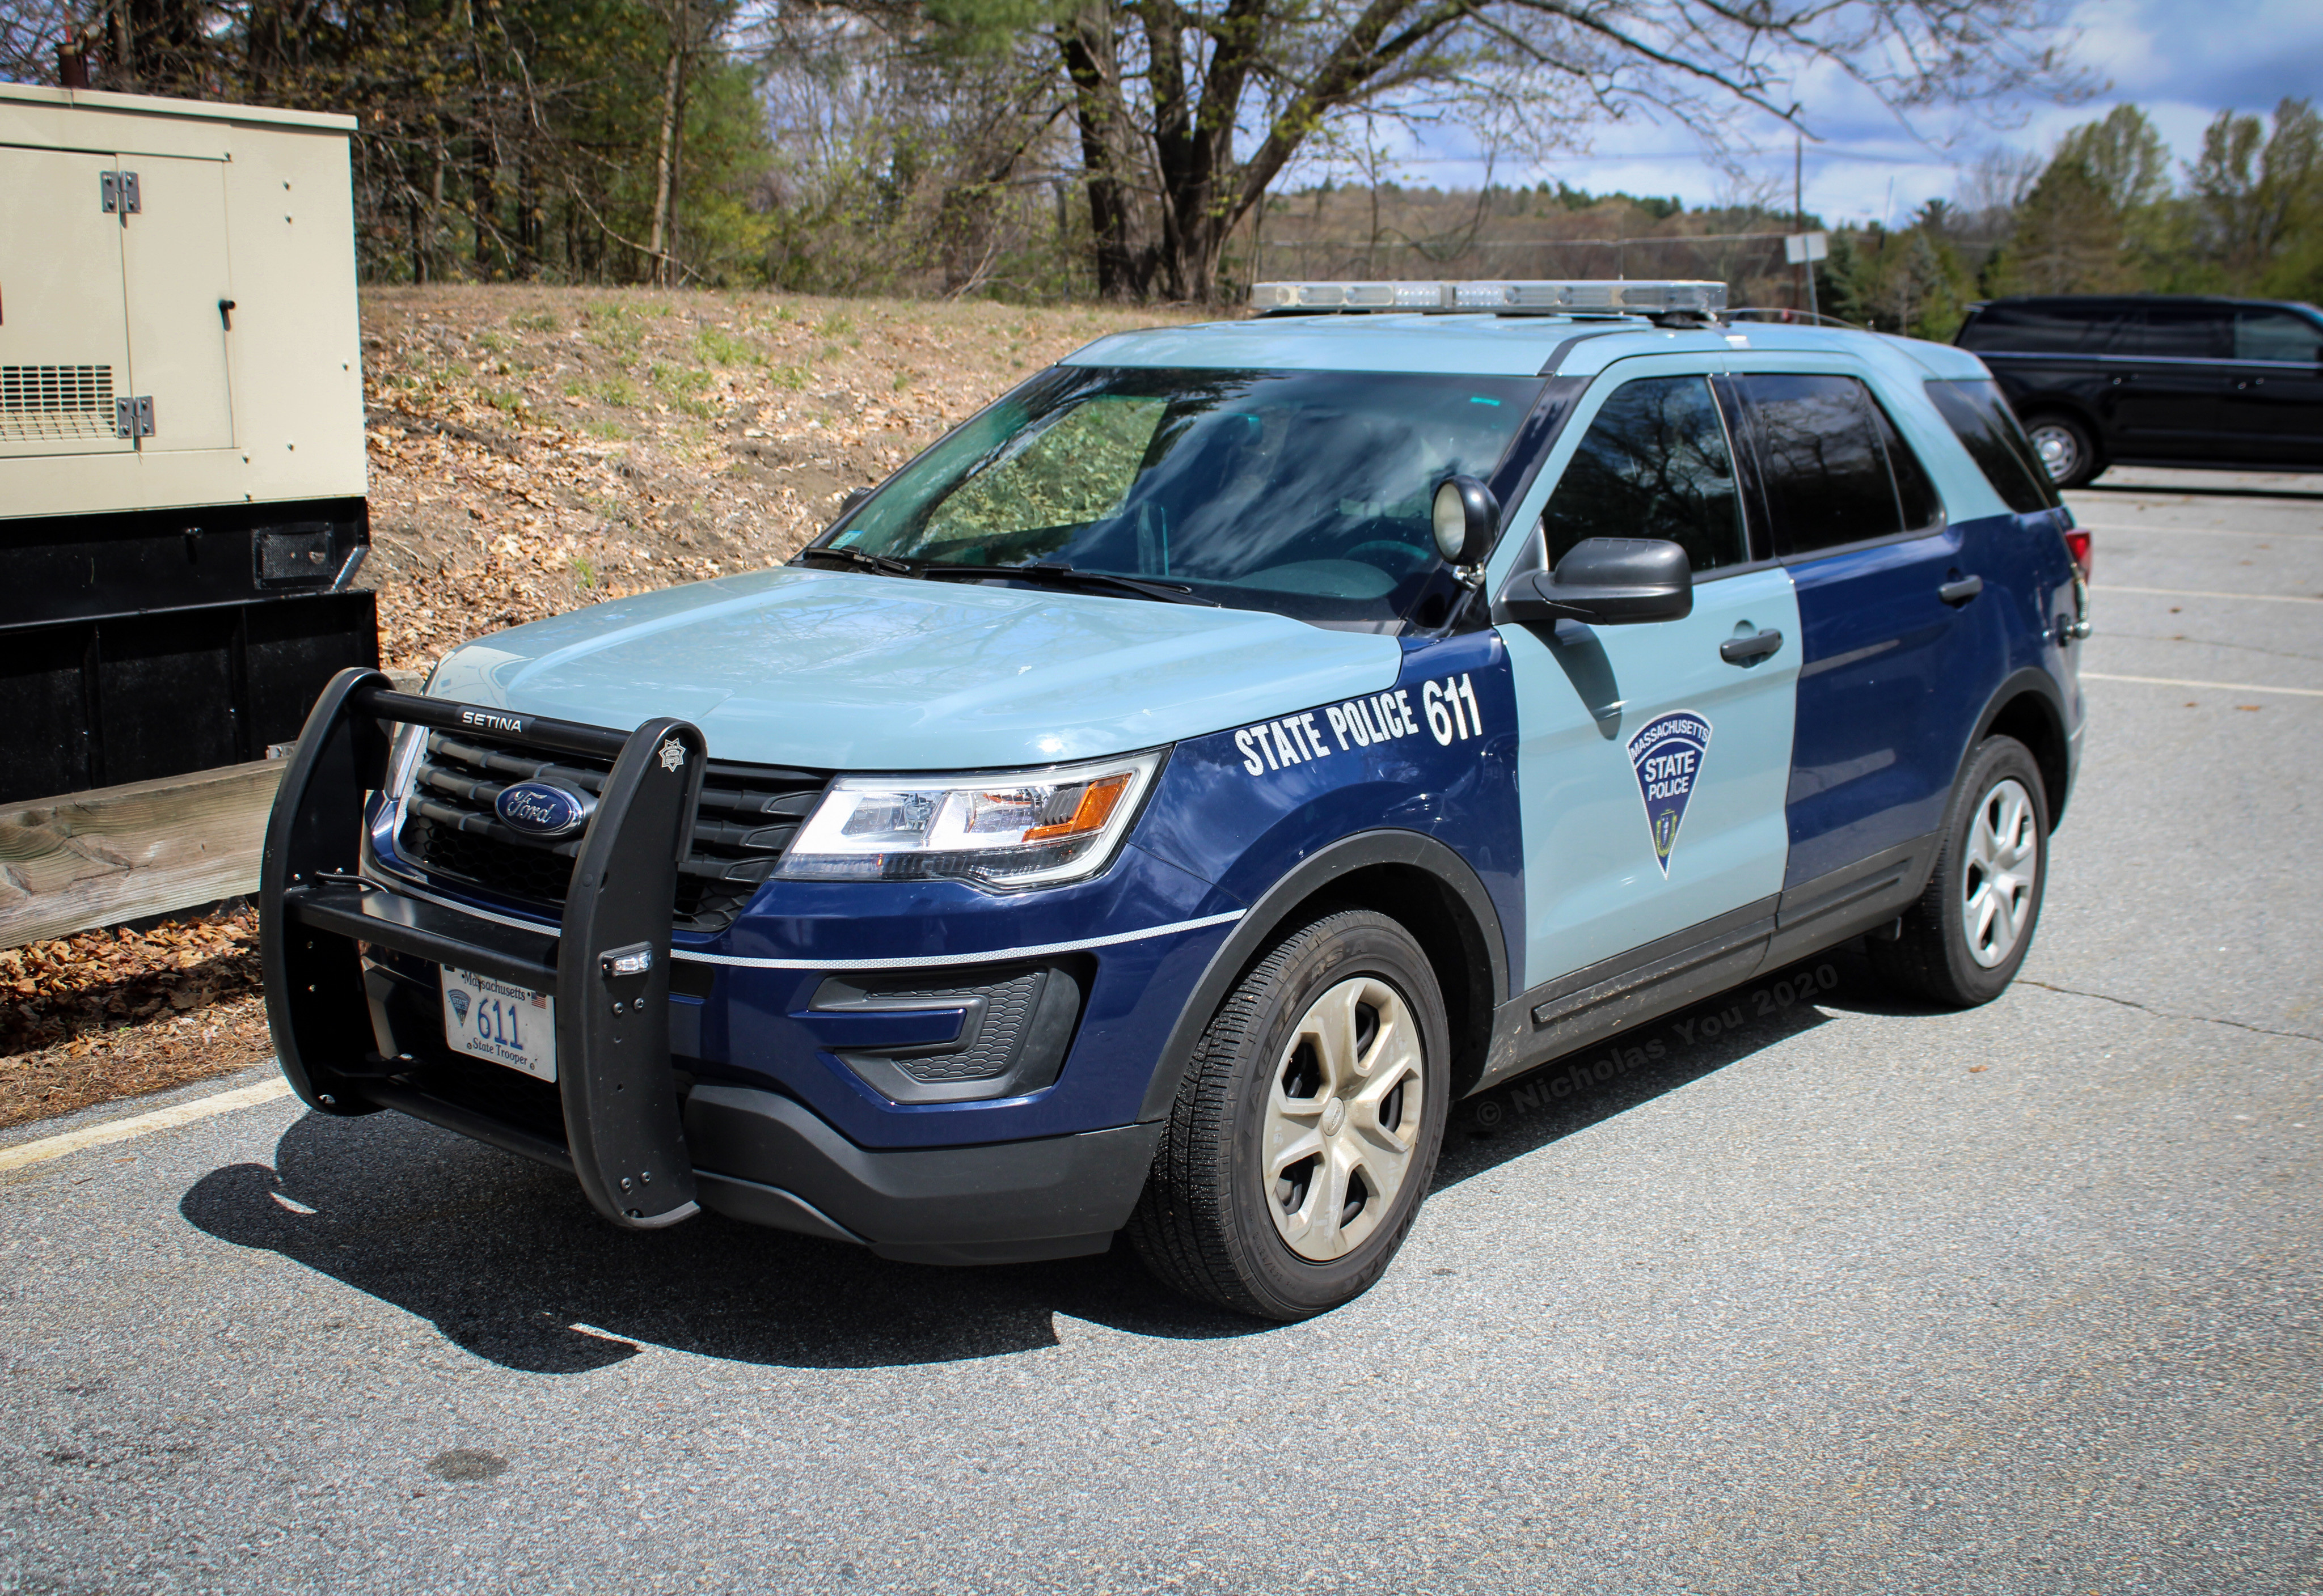 A photo  of Massachusetts State Police
            Cruiser 611, a 2017 Ford Police Interceptor Utility             taken by Nicholas You